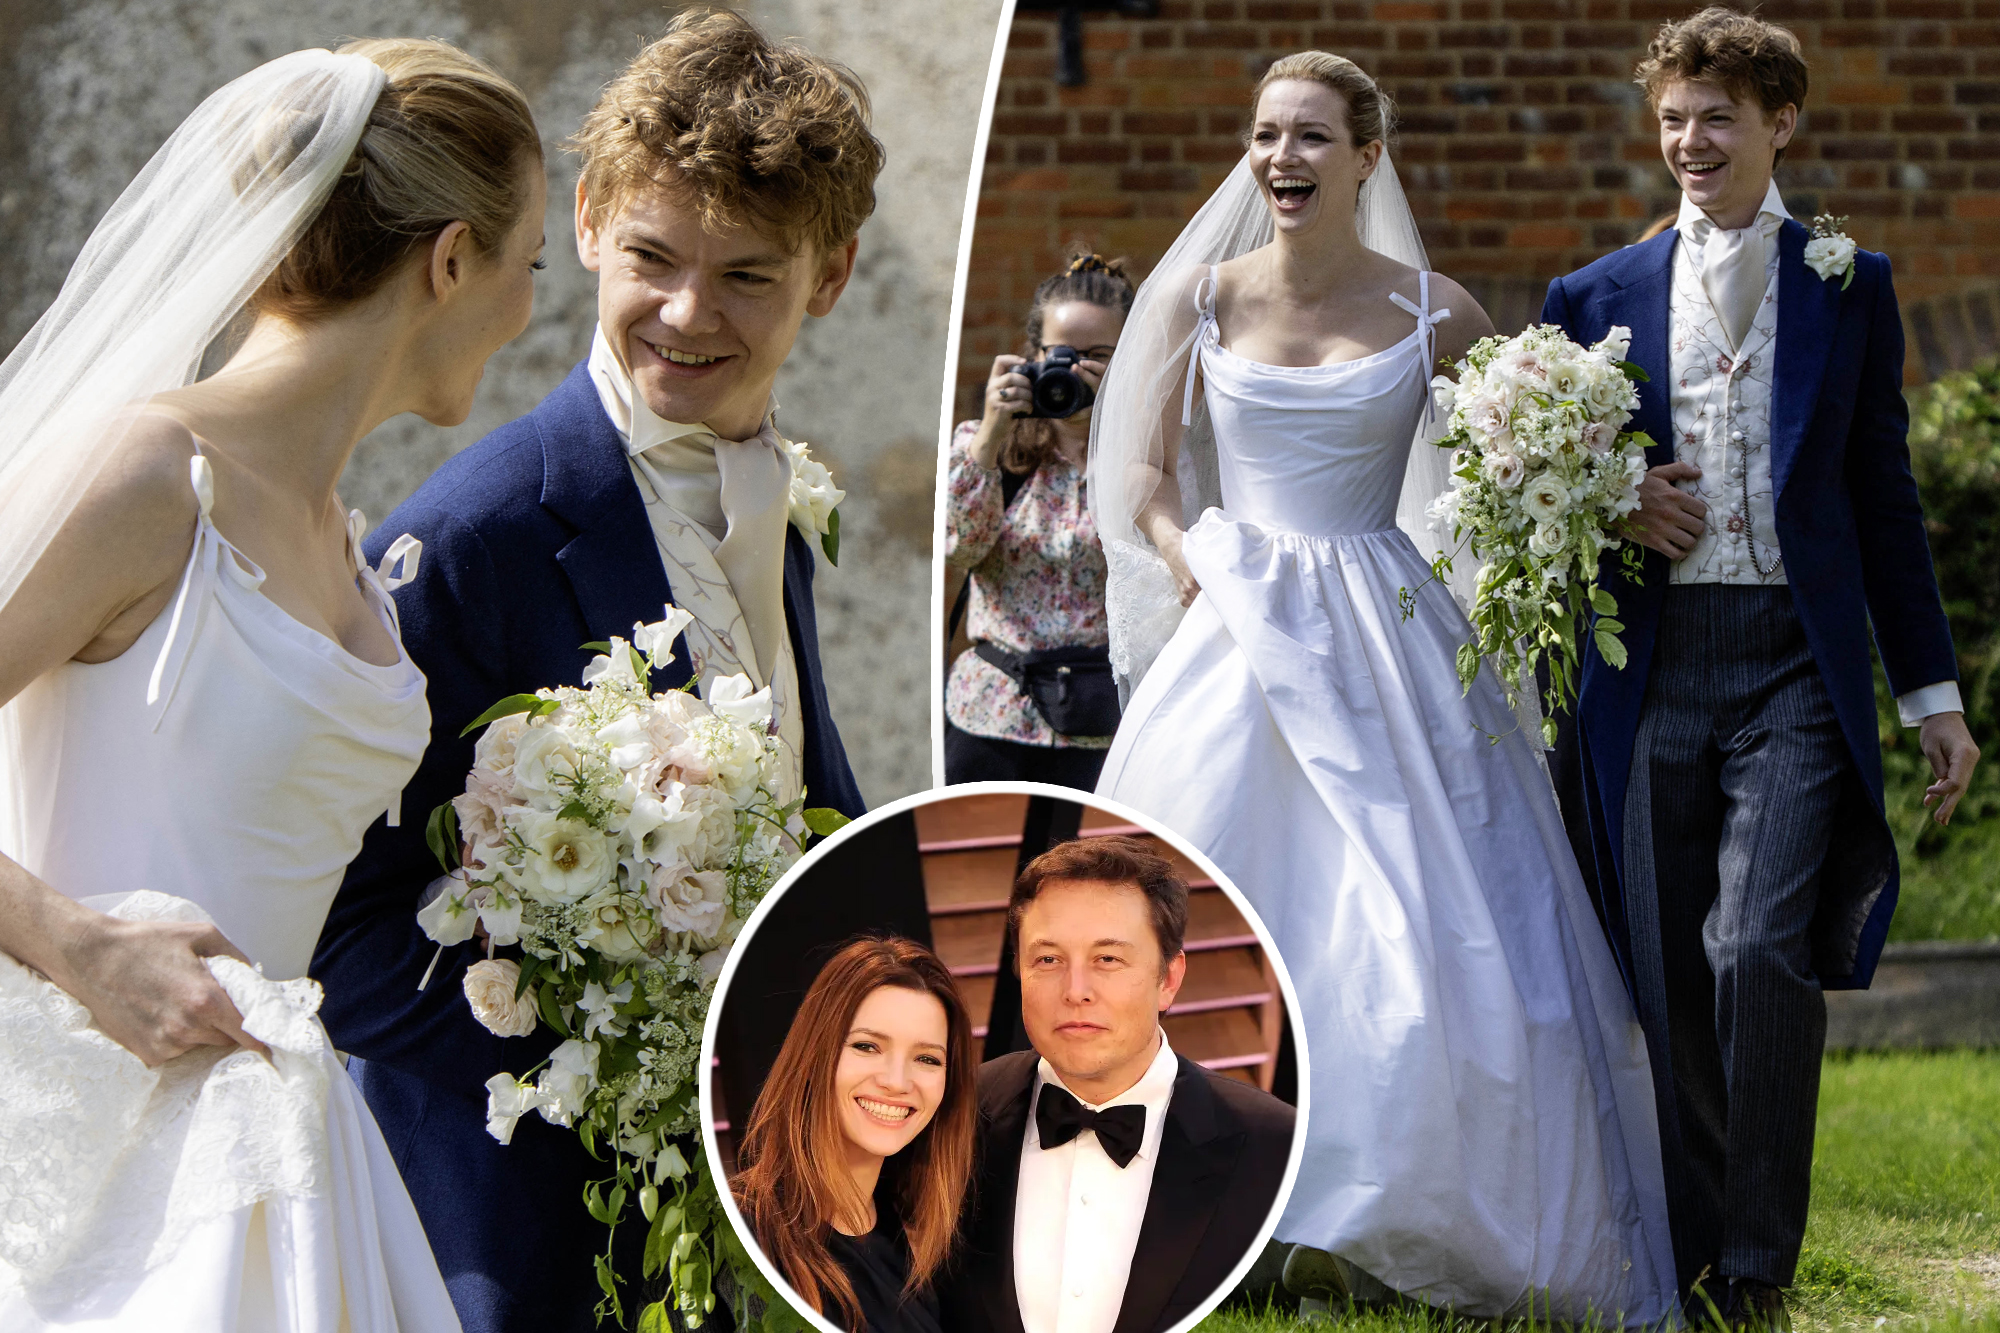 Elon Musk's Ex-Wife Talulah Riley Ties the Knot Again - Who's the Lucky Guy?